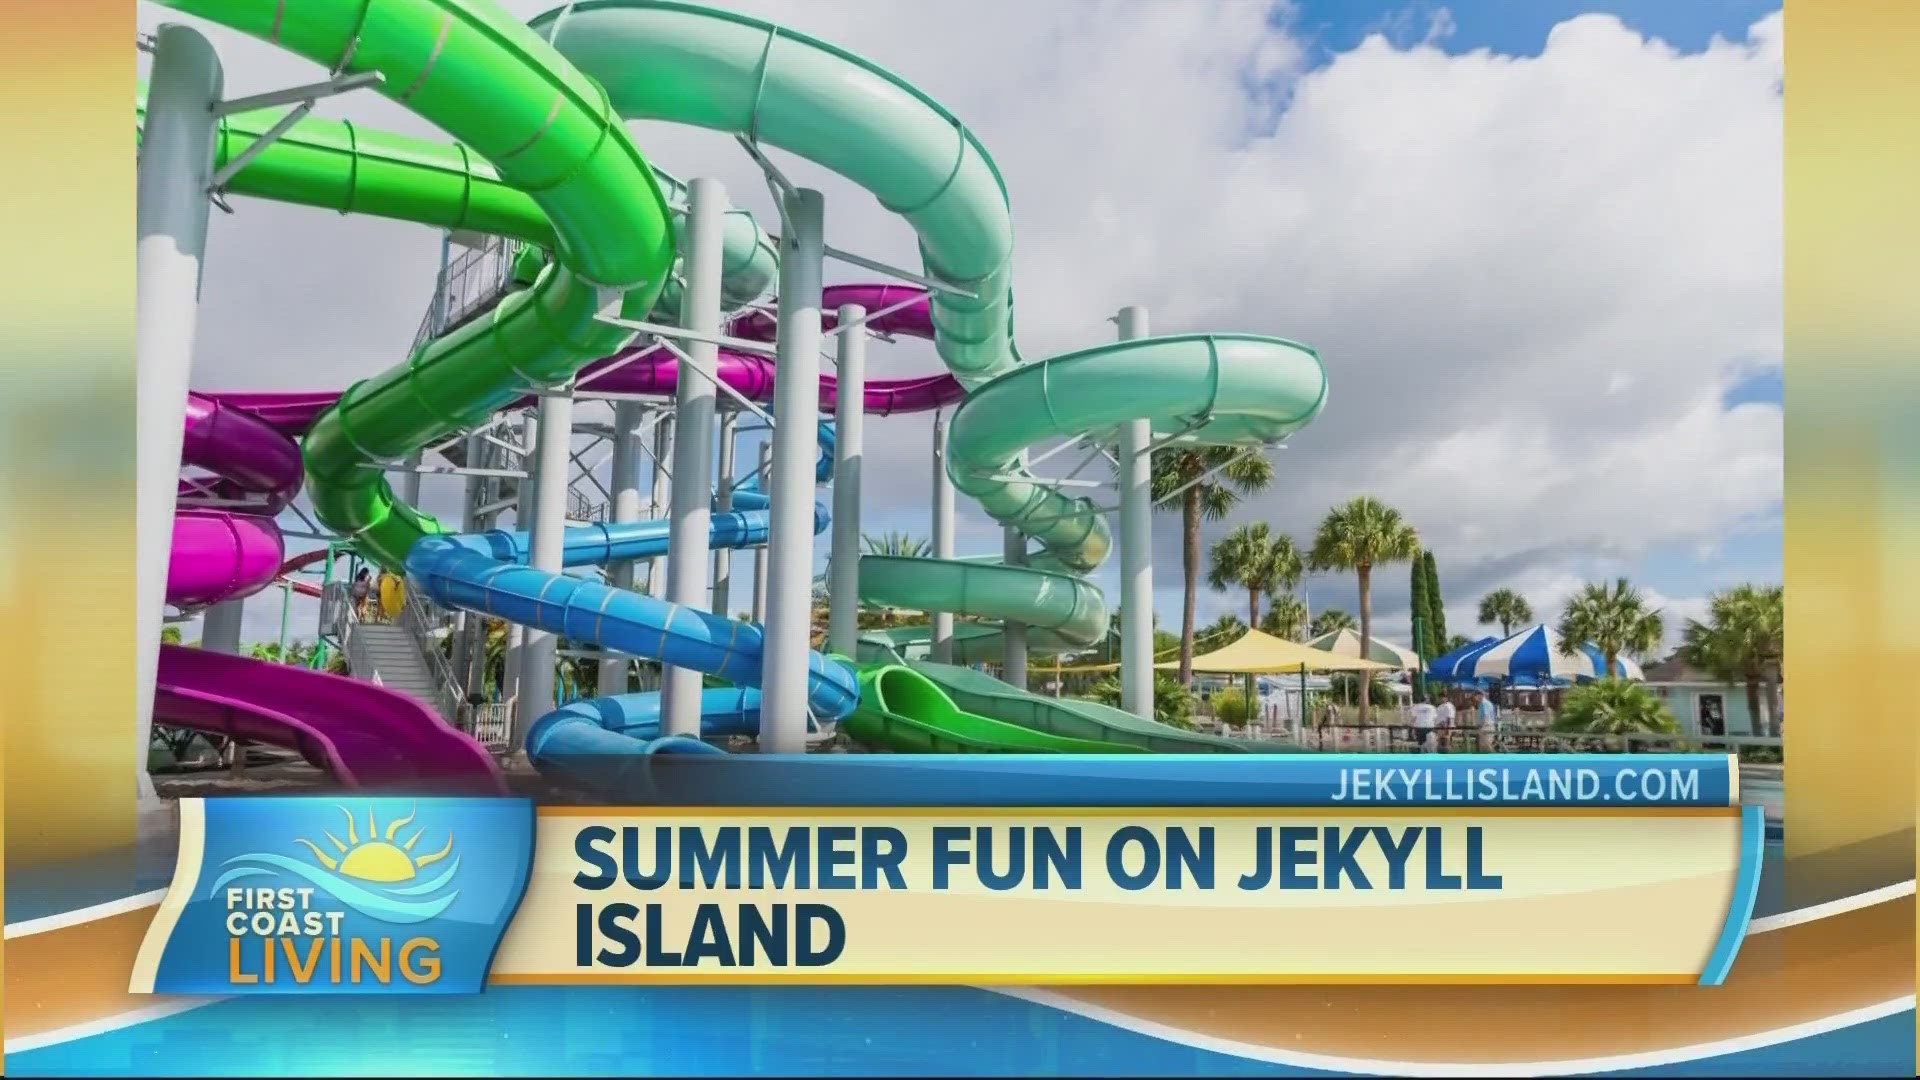 Jekyll Island Marketing Communications Manager, Kathryn Hearn shares the fun things you can do this summer.